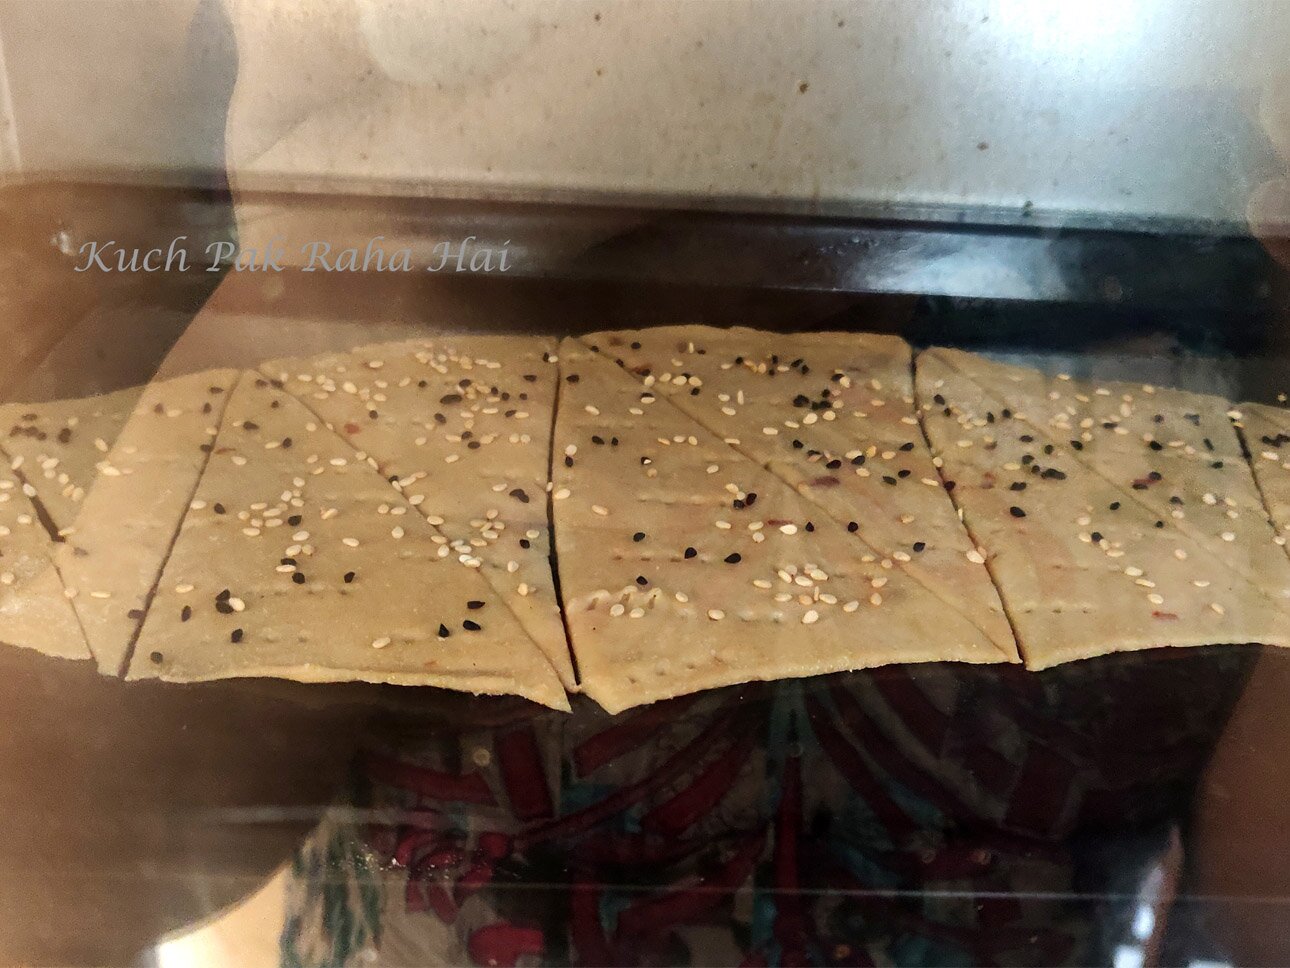 Baking lavash crackers in oven.